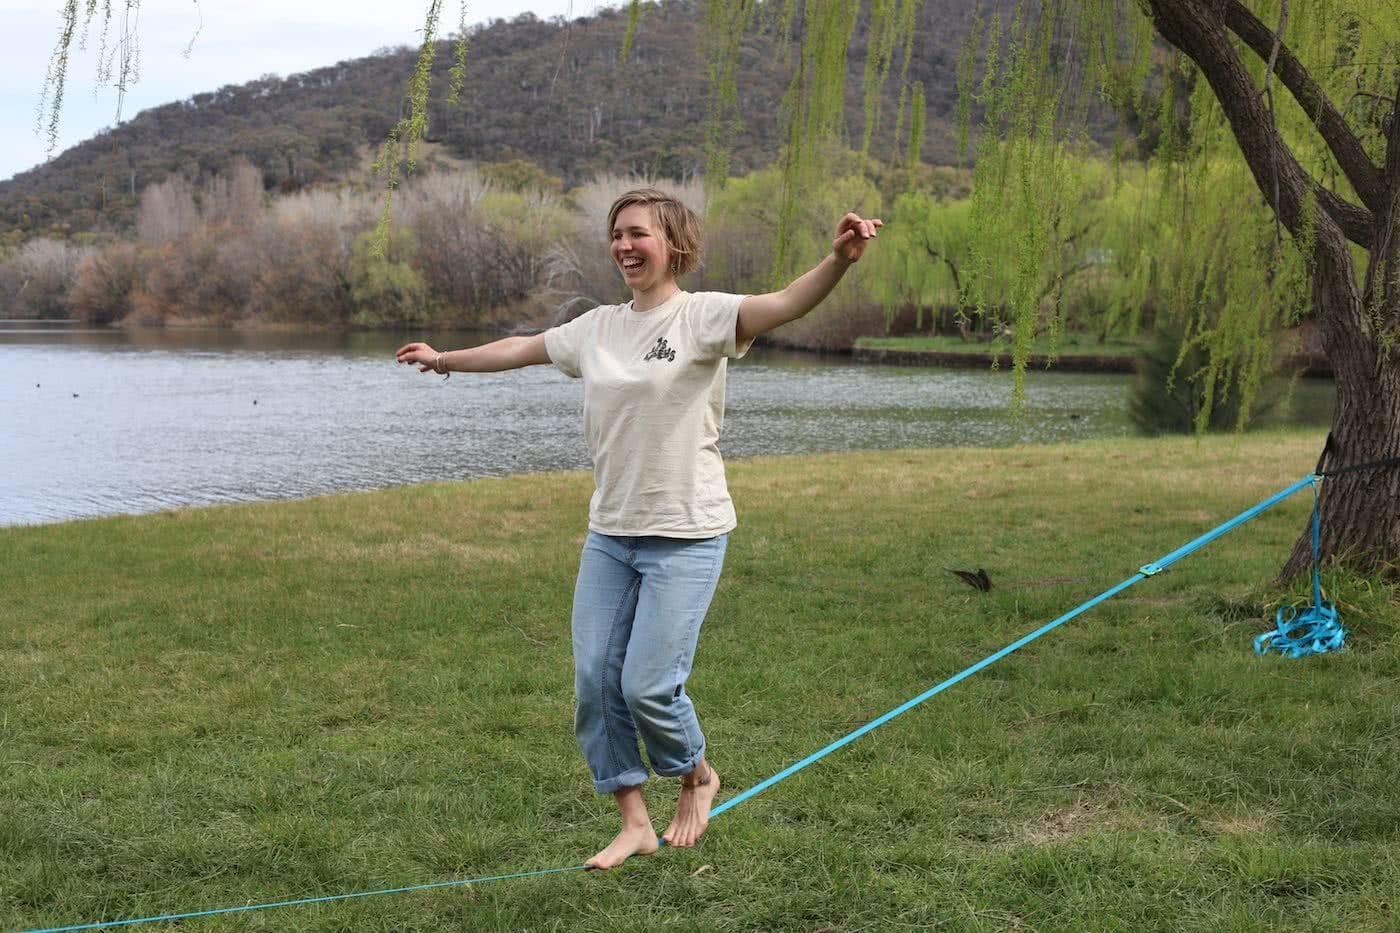 How To Squeeze More Outdoors Time Into Your Workday by Mattie Gould Smiling and slacklining in Canberra